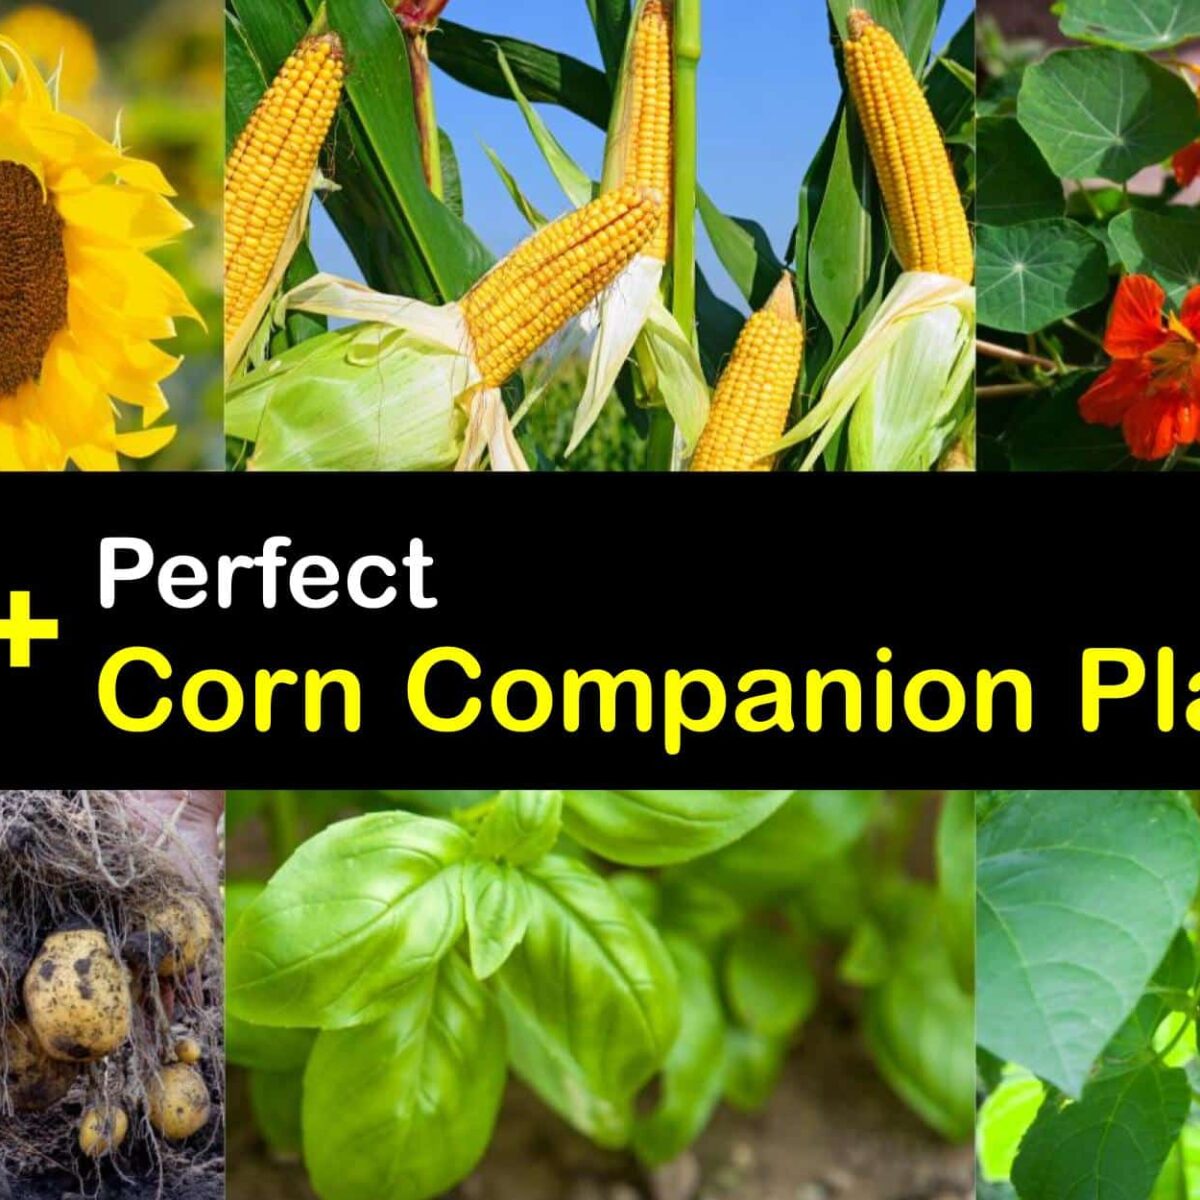 Image of Corn companion plant for beets